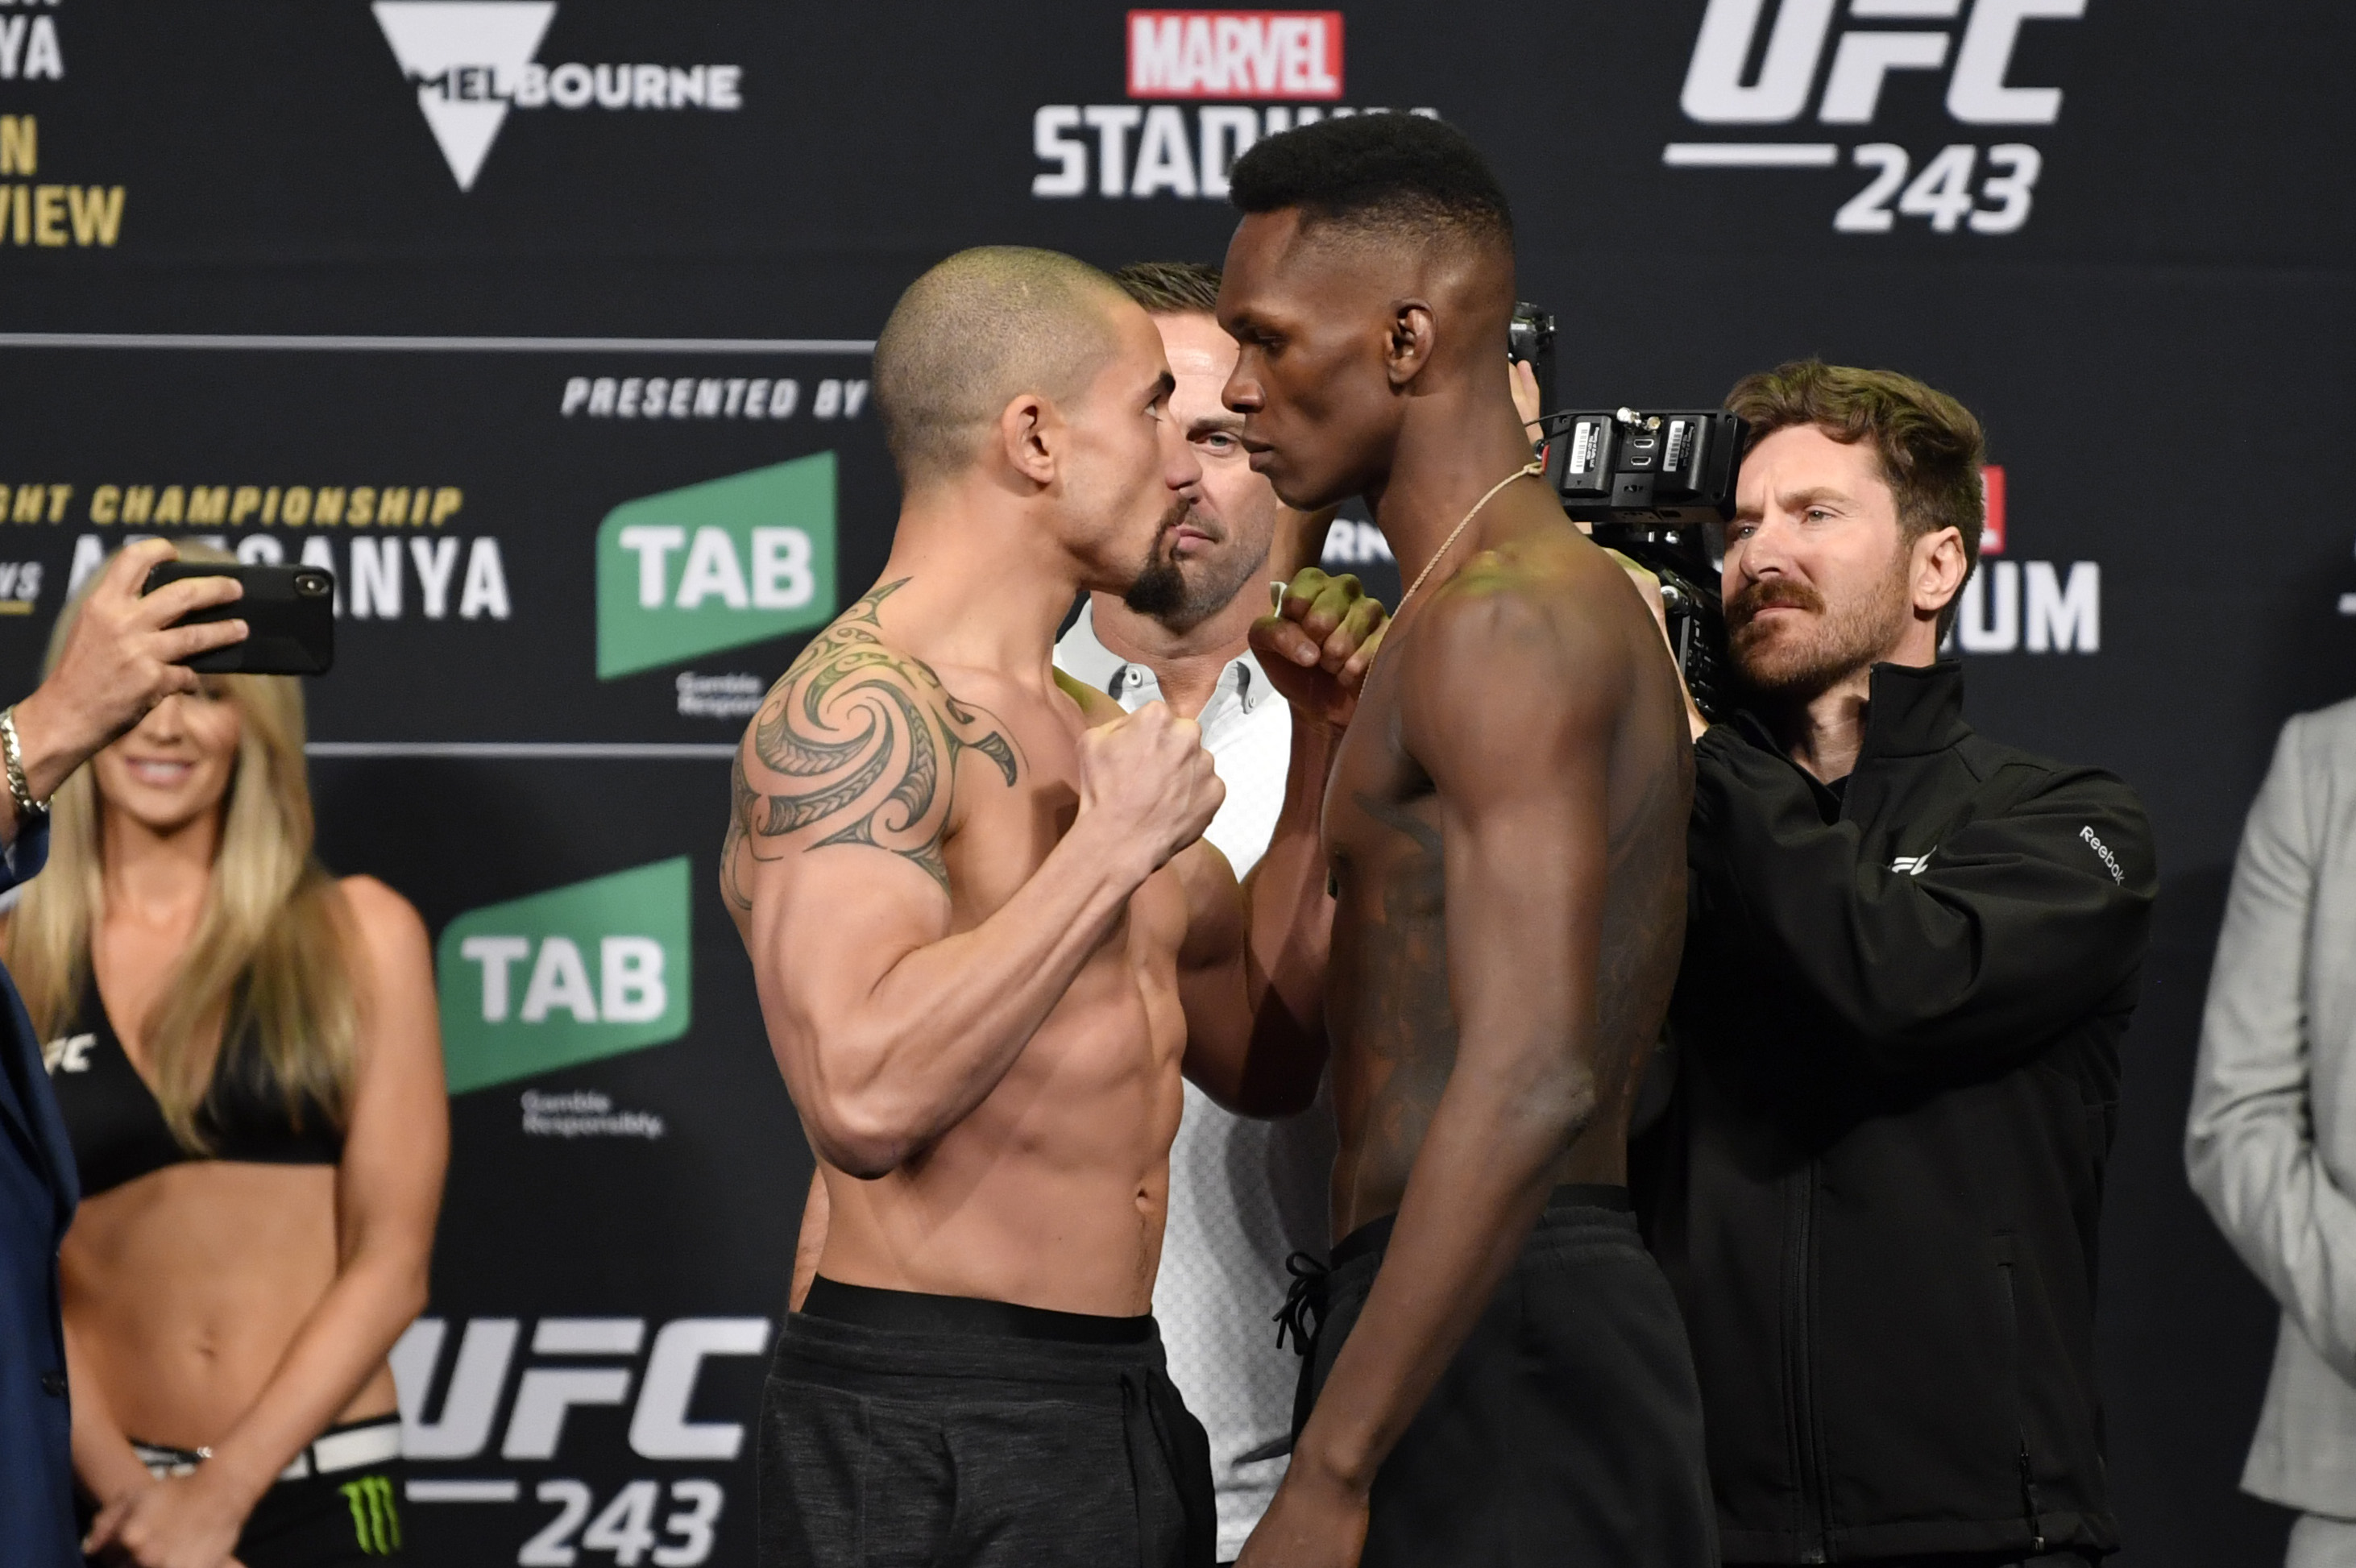 Robert Whittaker and Israel Adesanya face off ahead of their UFC 243 title fight.